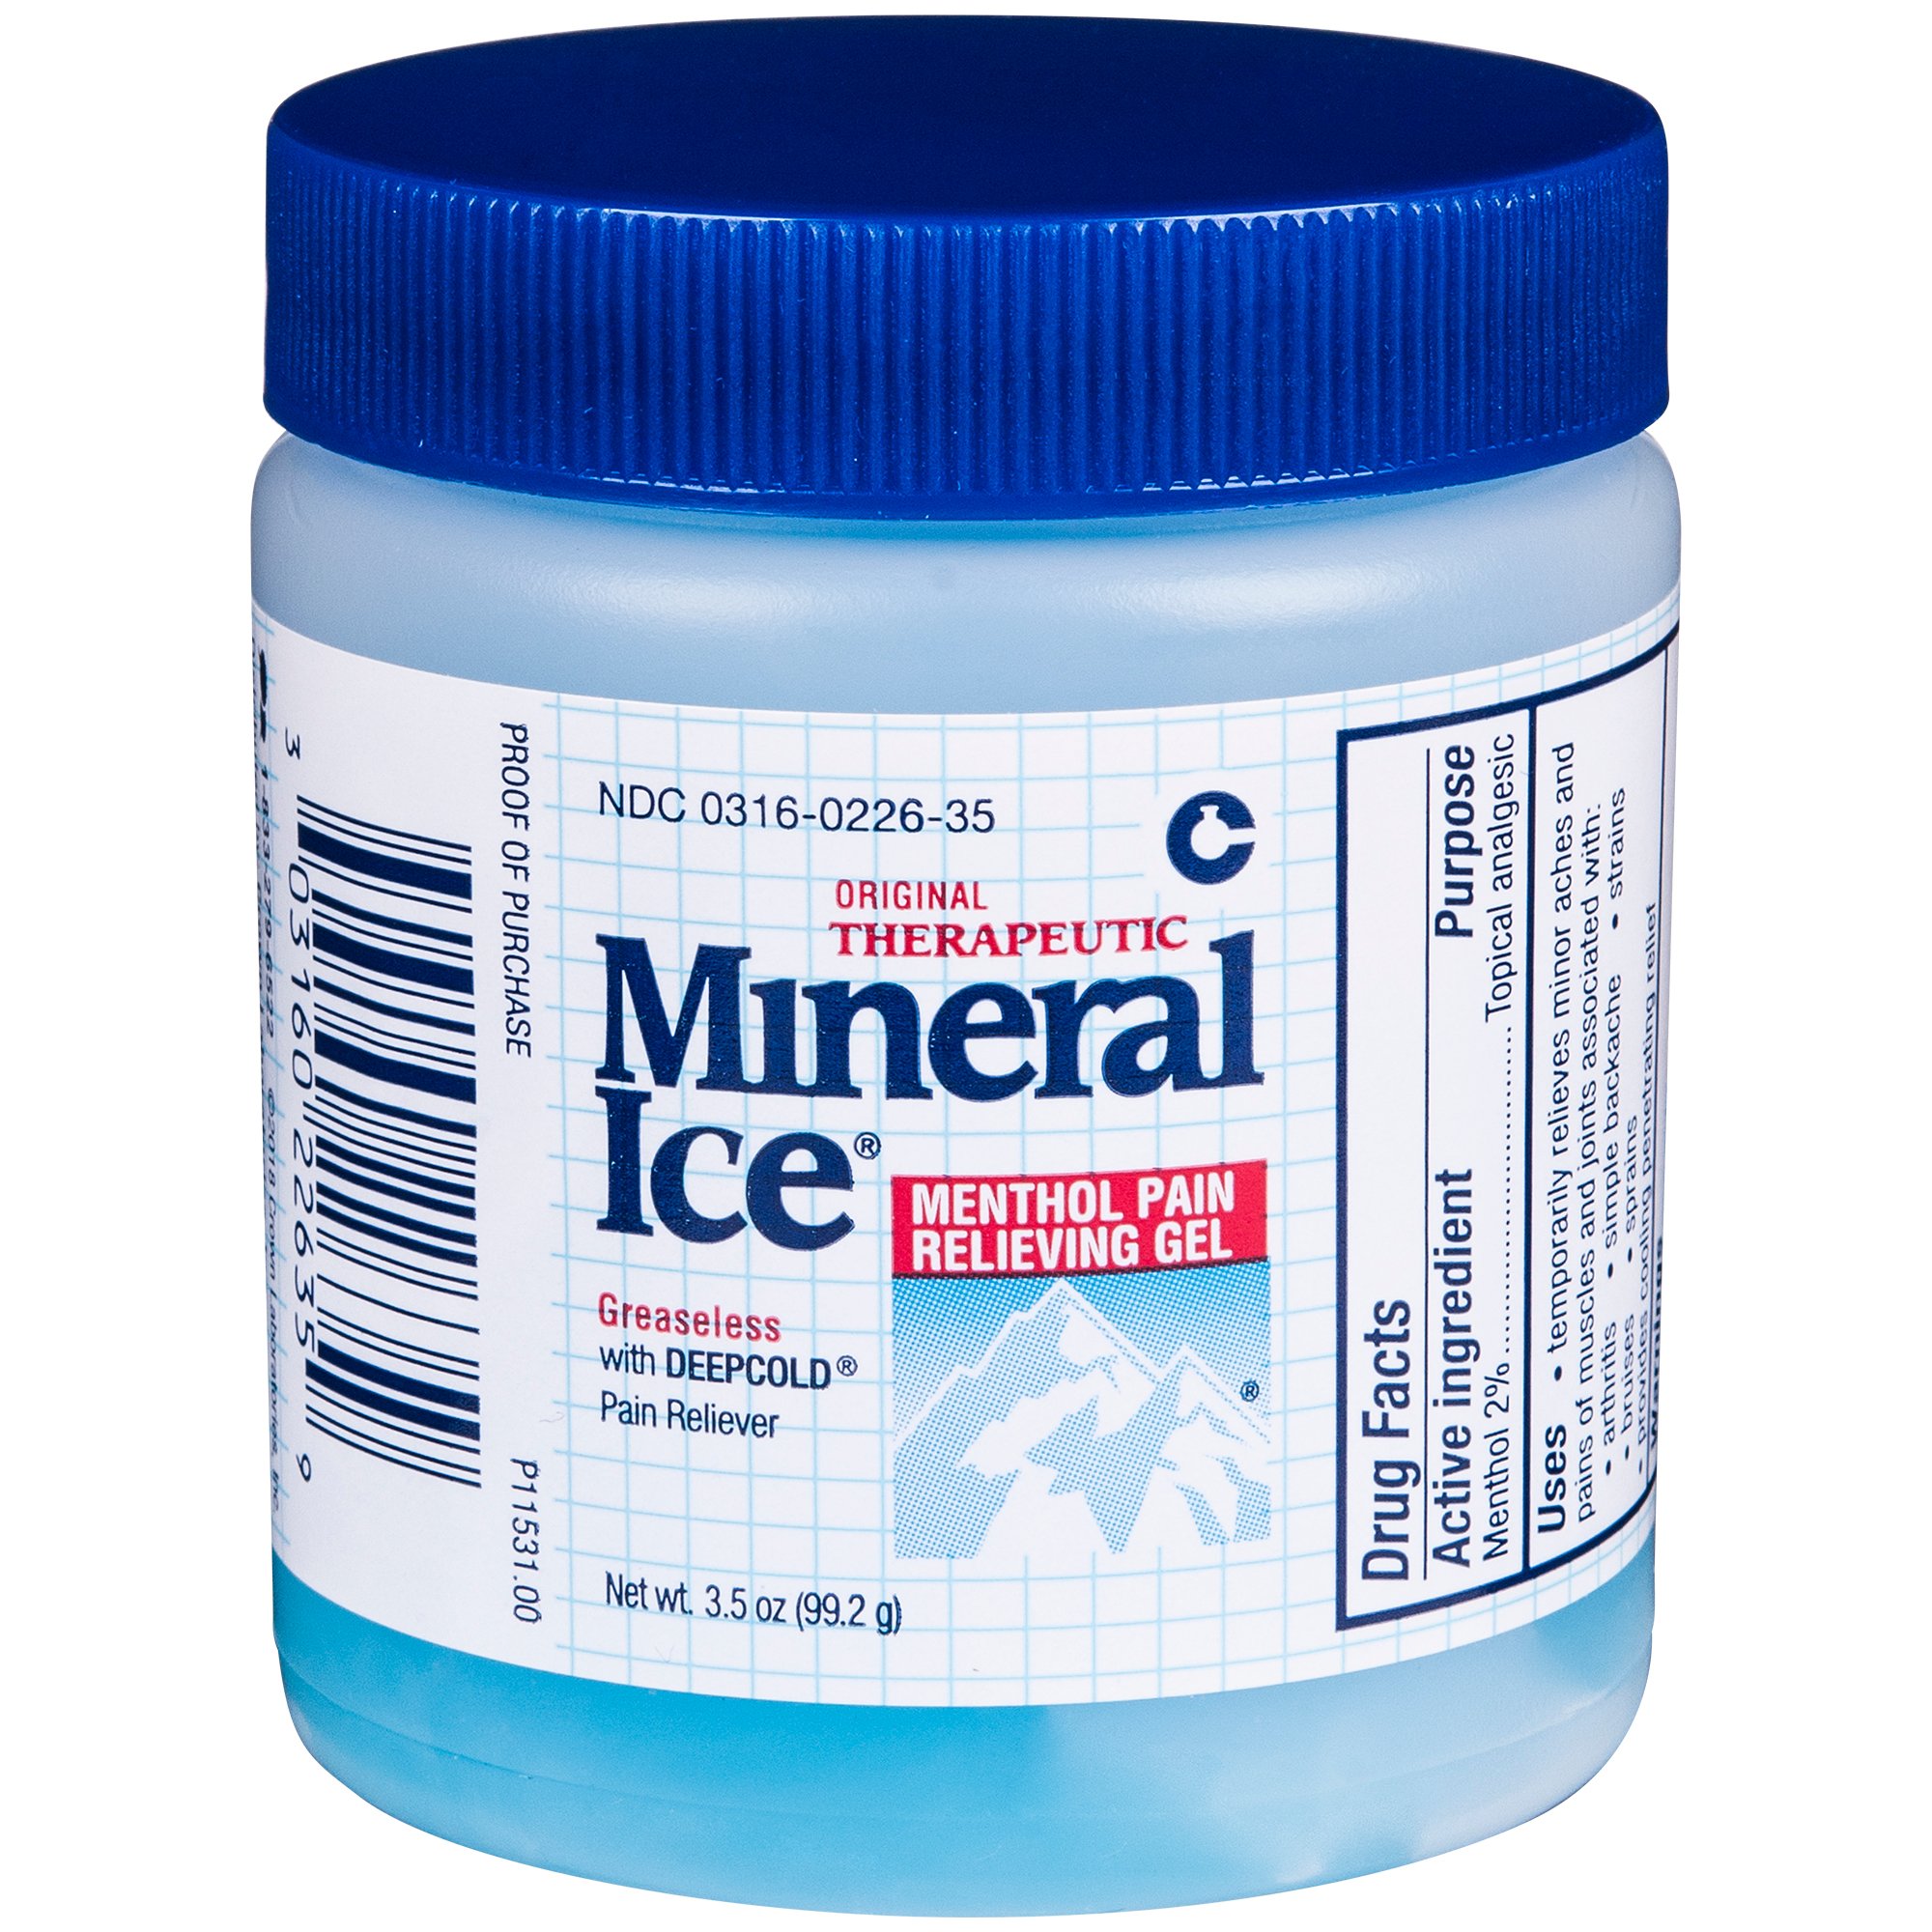 Mineral Ice Menthol Pain Relieving - Shop Medicines & Treatments at H-E-B